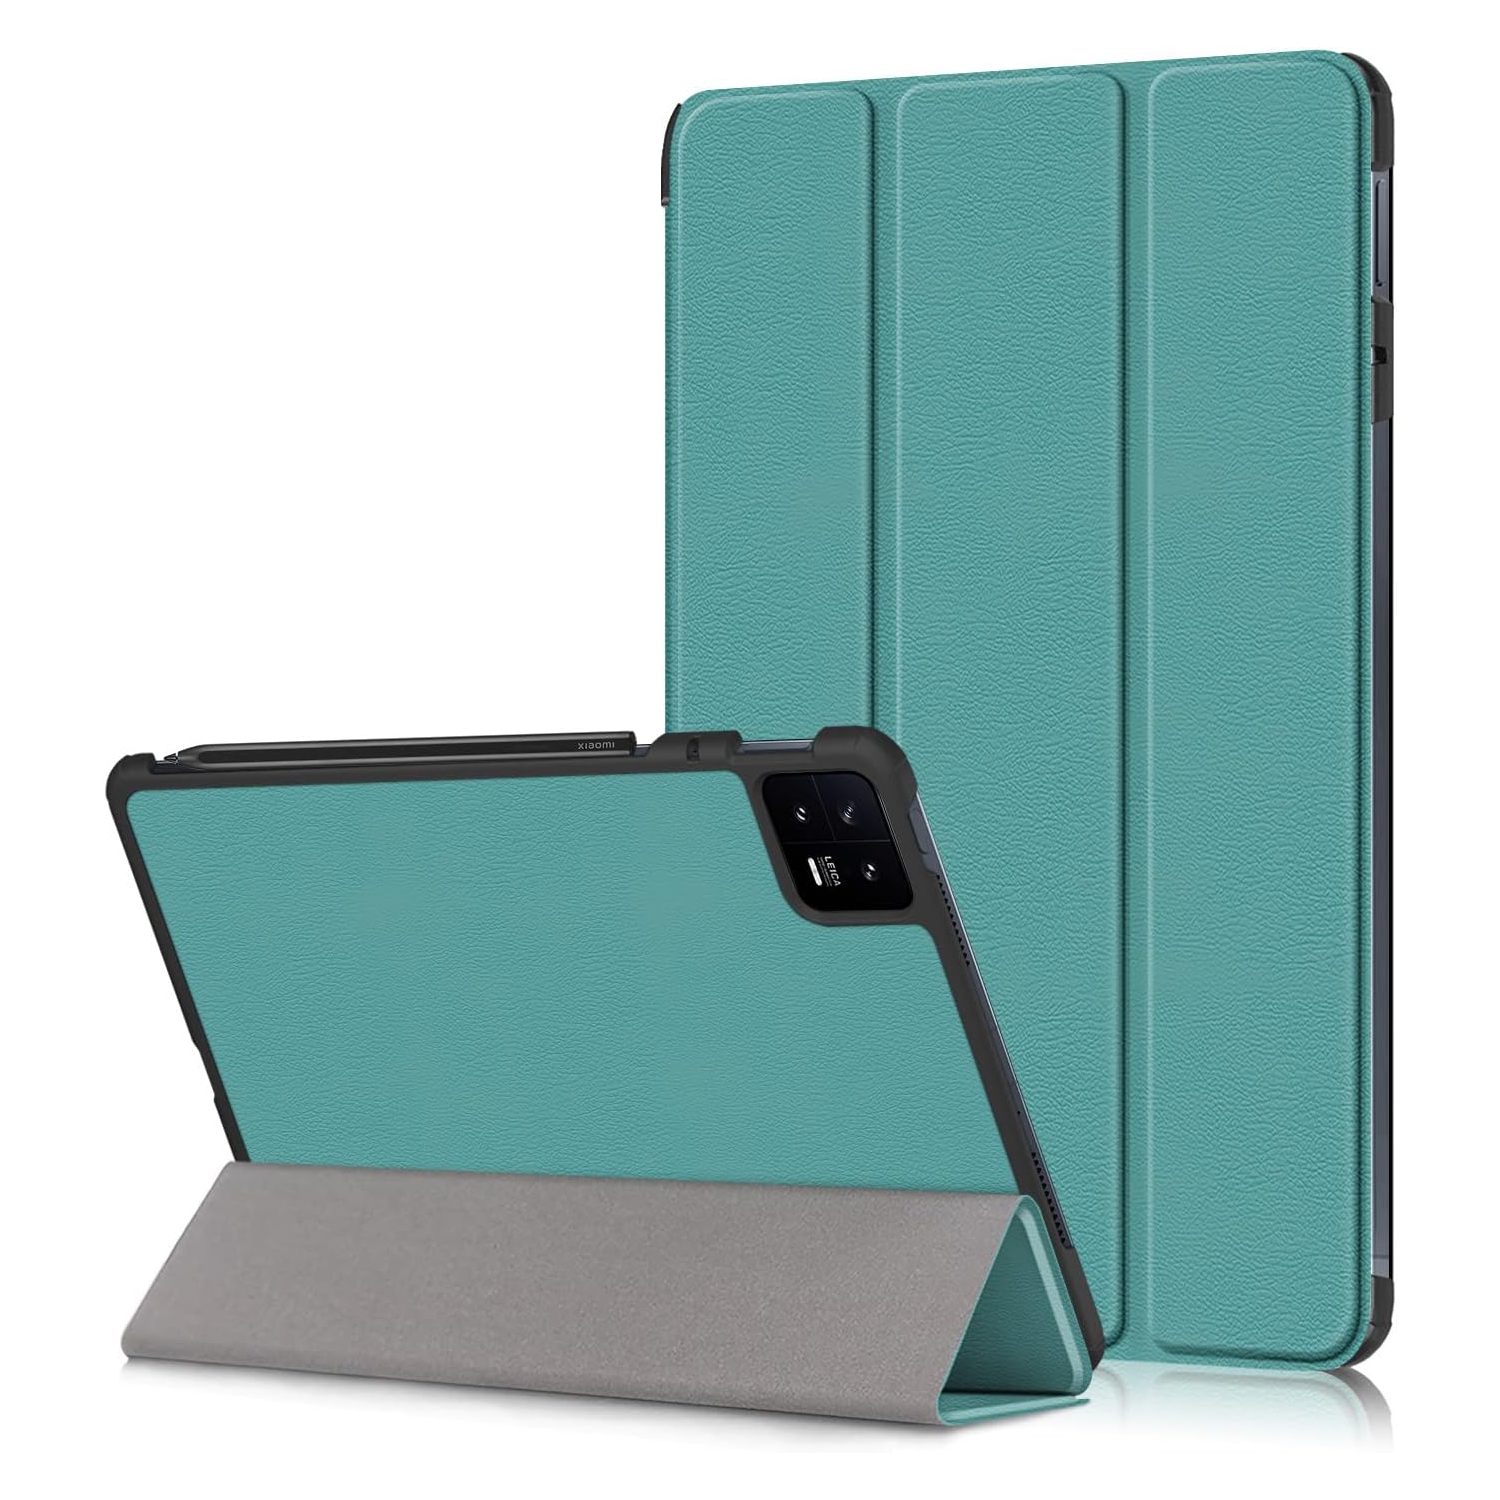 Case for Xiaomi Pad 6 11 inch,Slim Stand Hard Back Shell Protective Smart Cover for Xiaomi Pad 6/Pad 6 Pro